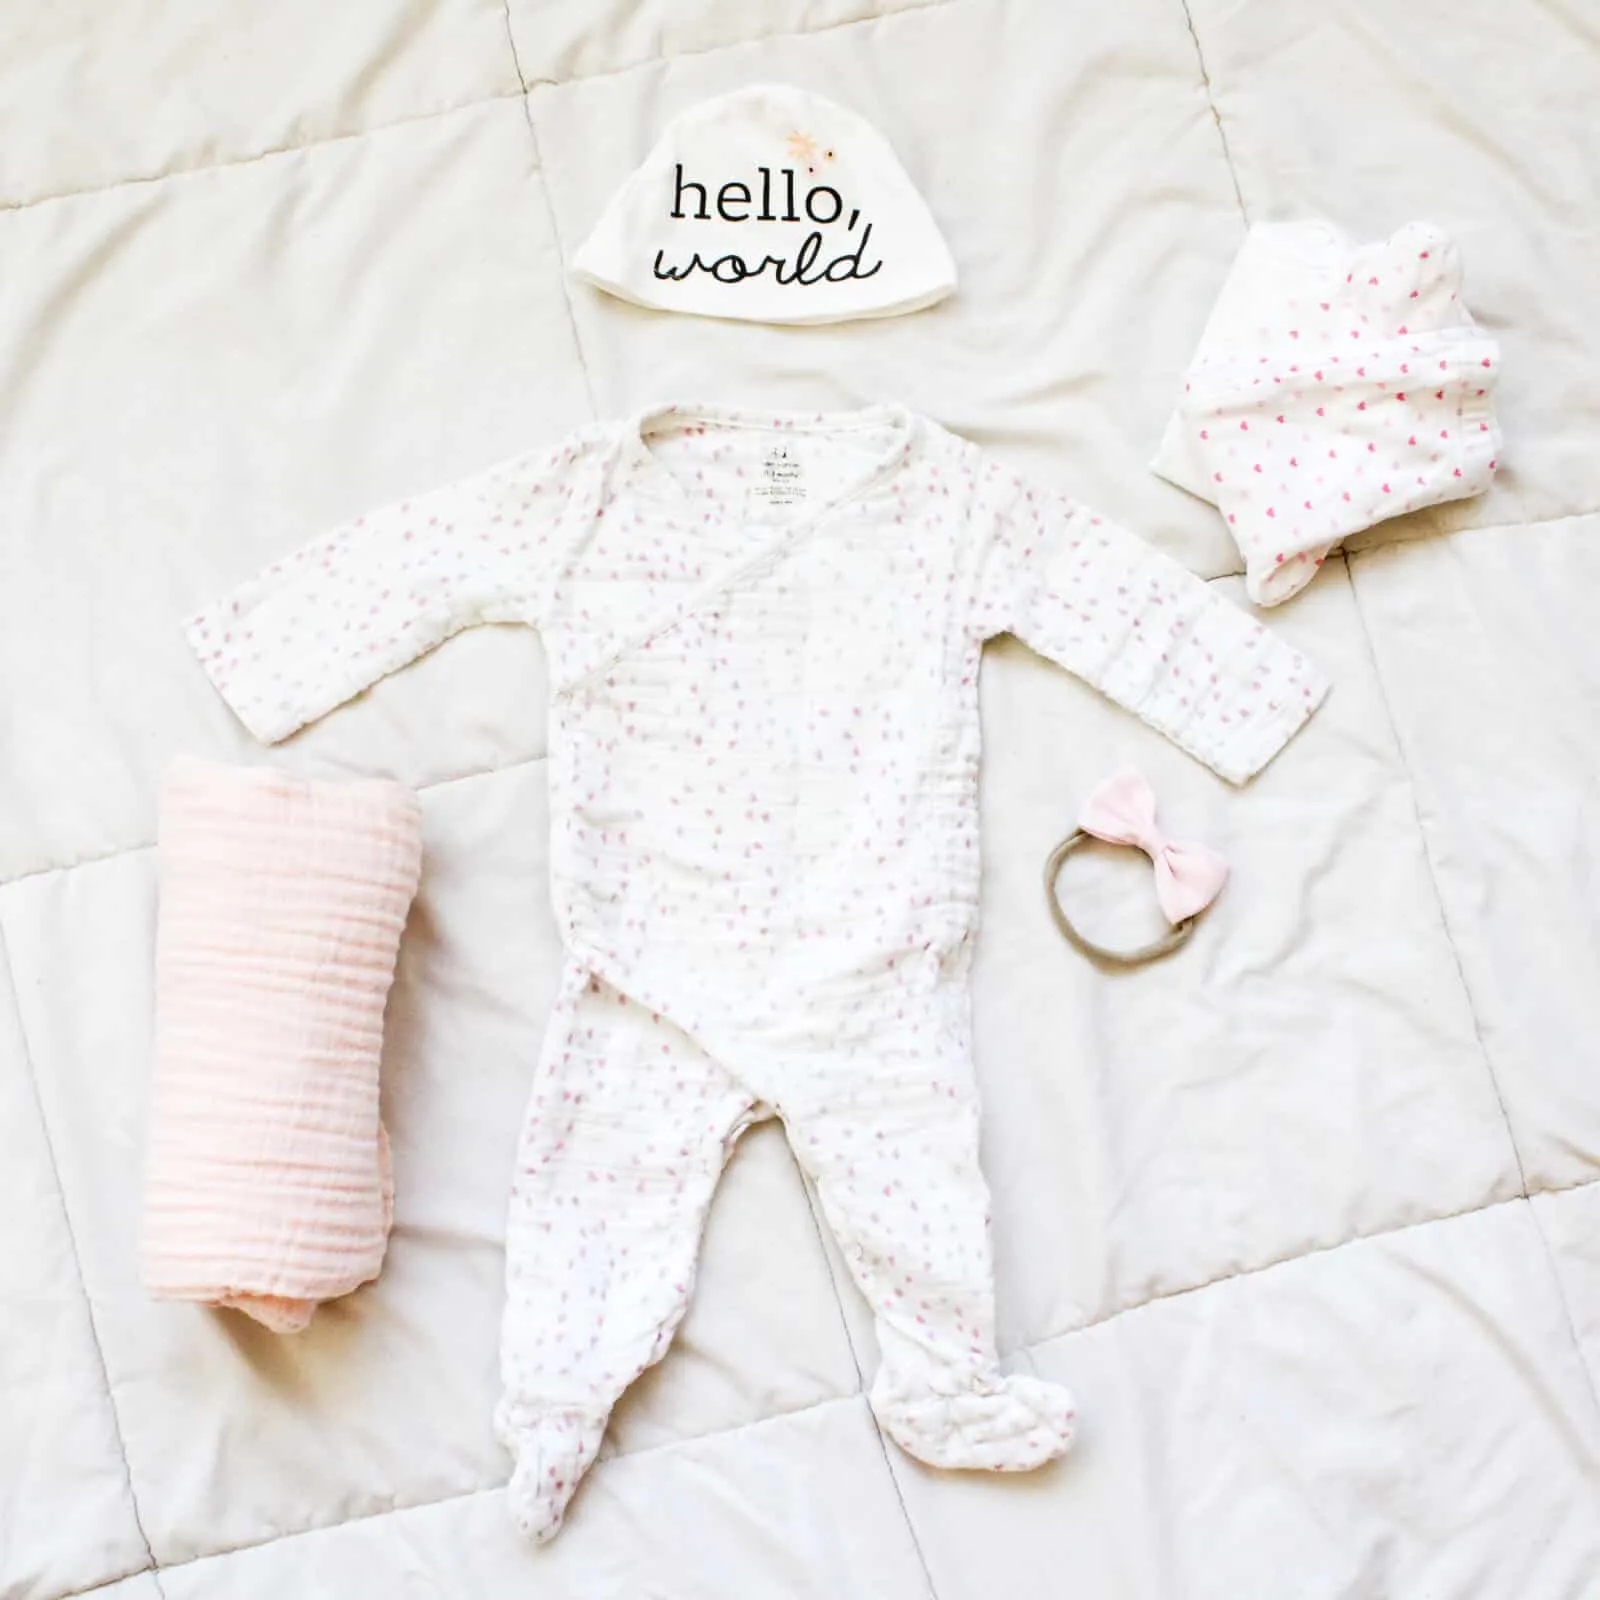 Newborn baby outfit and blanket on bed.